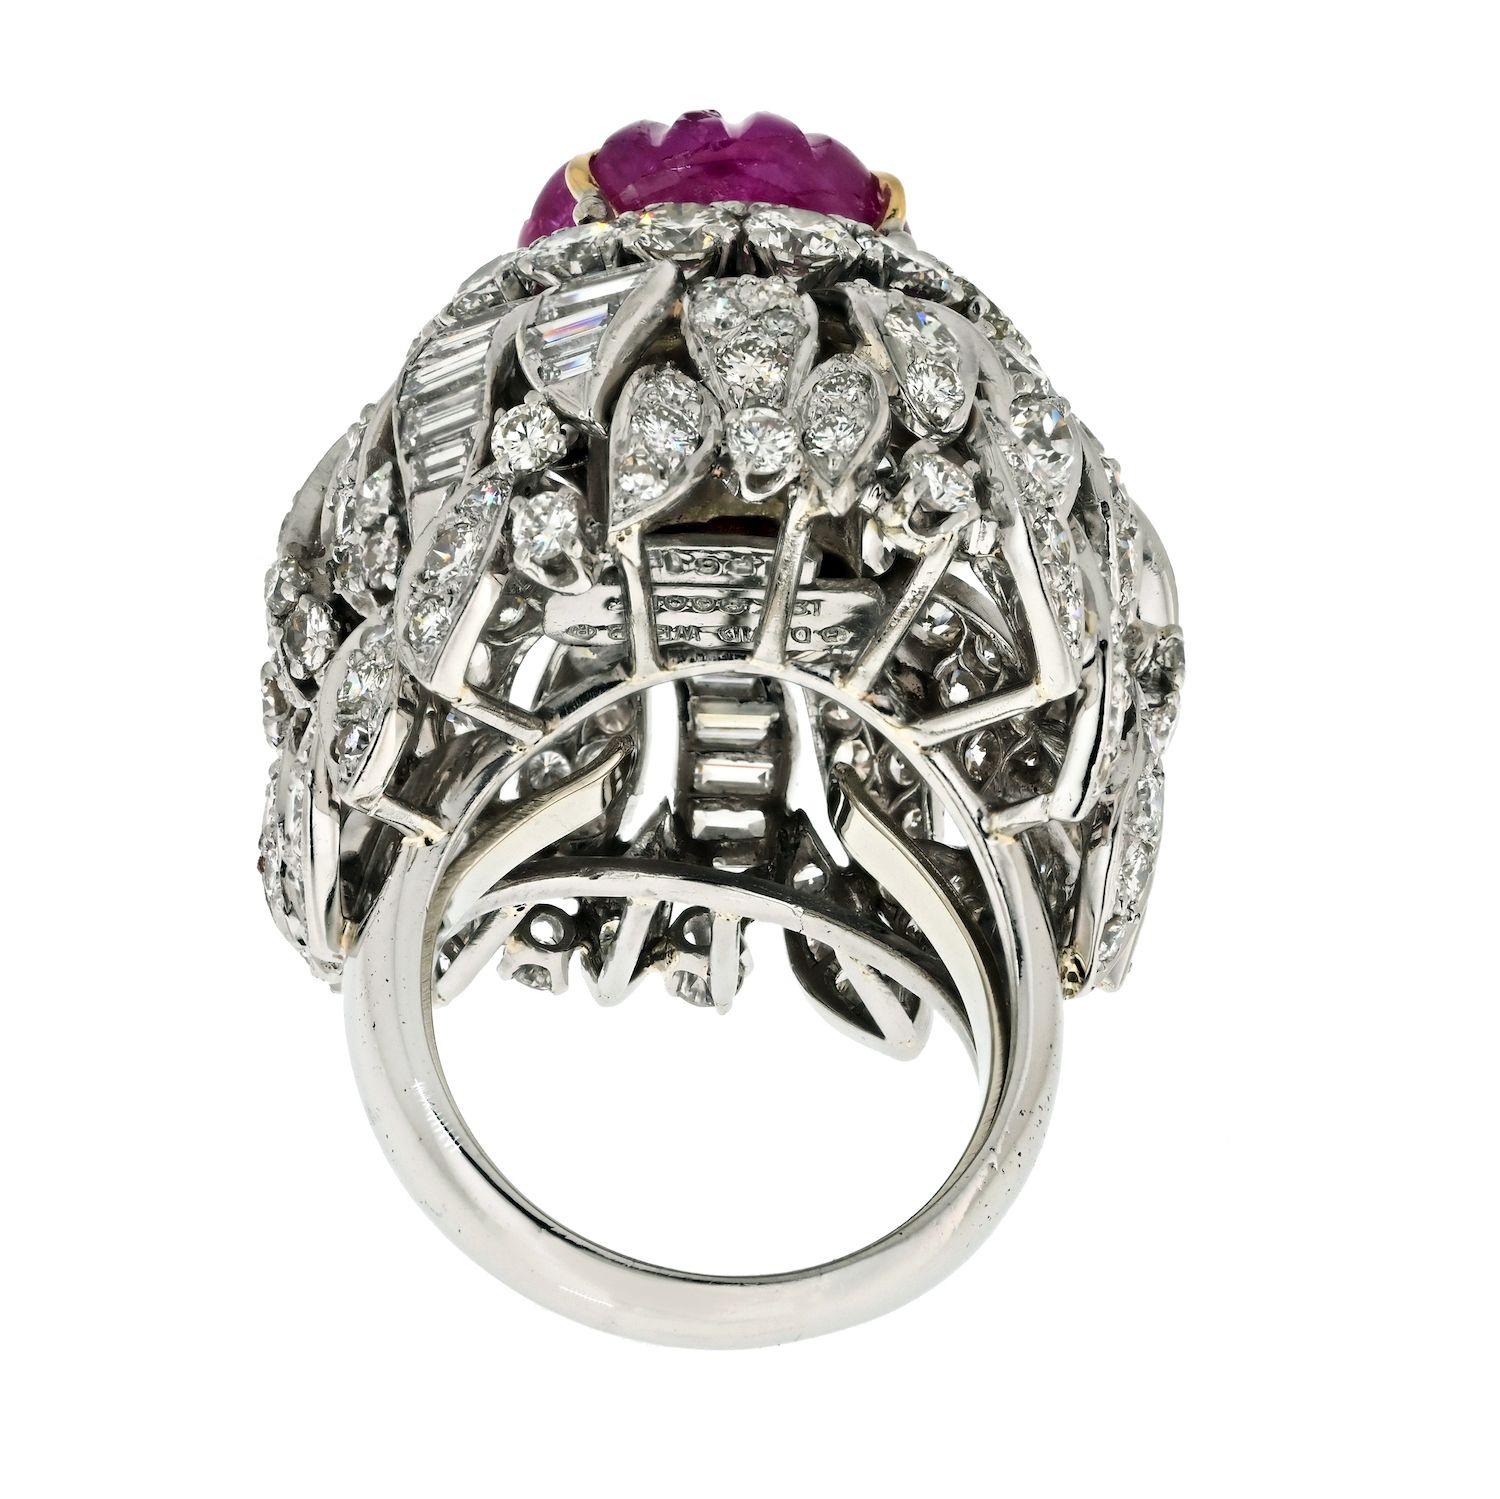 Unveil the allure of a true masterpiece with the Estate David Webb Platinum & 18K White Gold Carved Ruby and Diamond Bombe Cocktail Ring. With its captivating presence, this ring exemplifies the essence of opulence and artistry that David Webb is